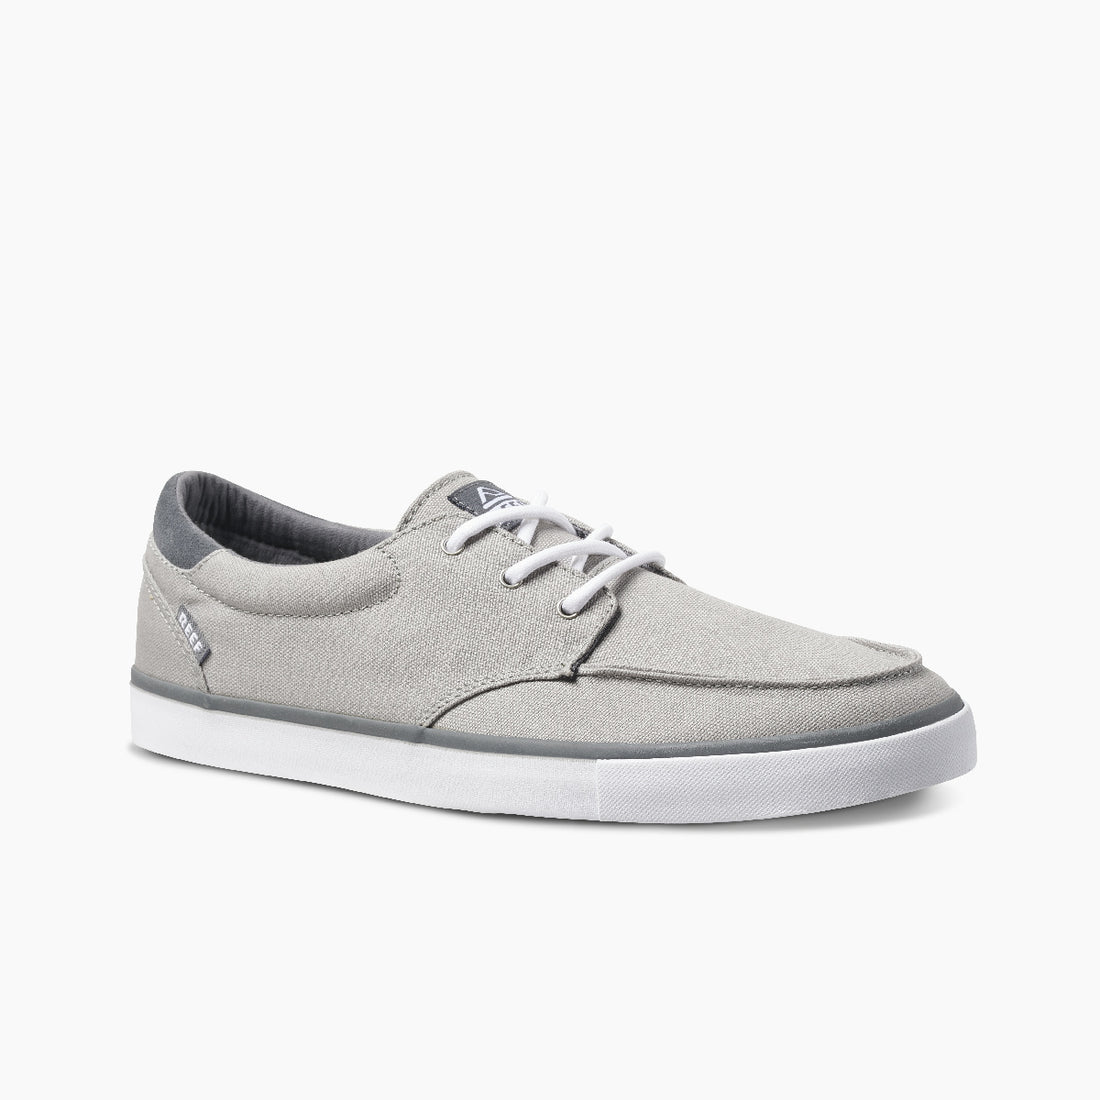 REEF DECKHAND 3 MEN&#39;S CASUAL BOAT SHOE (GREY/WHT) Sunny Smith LLC